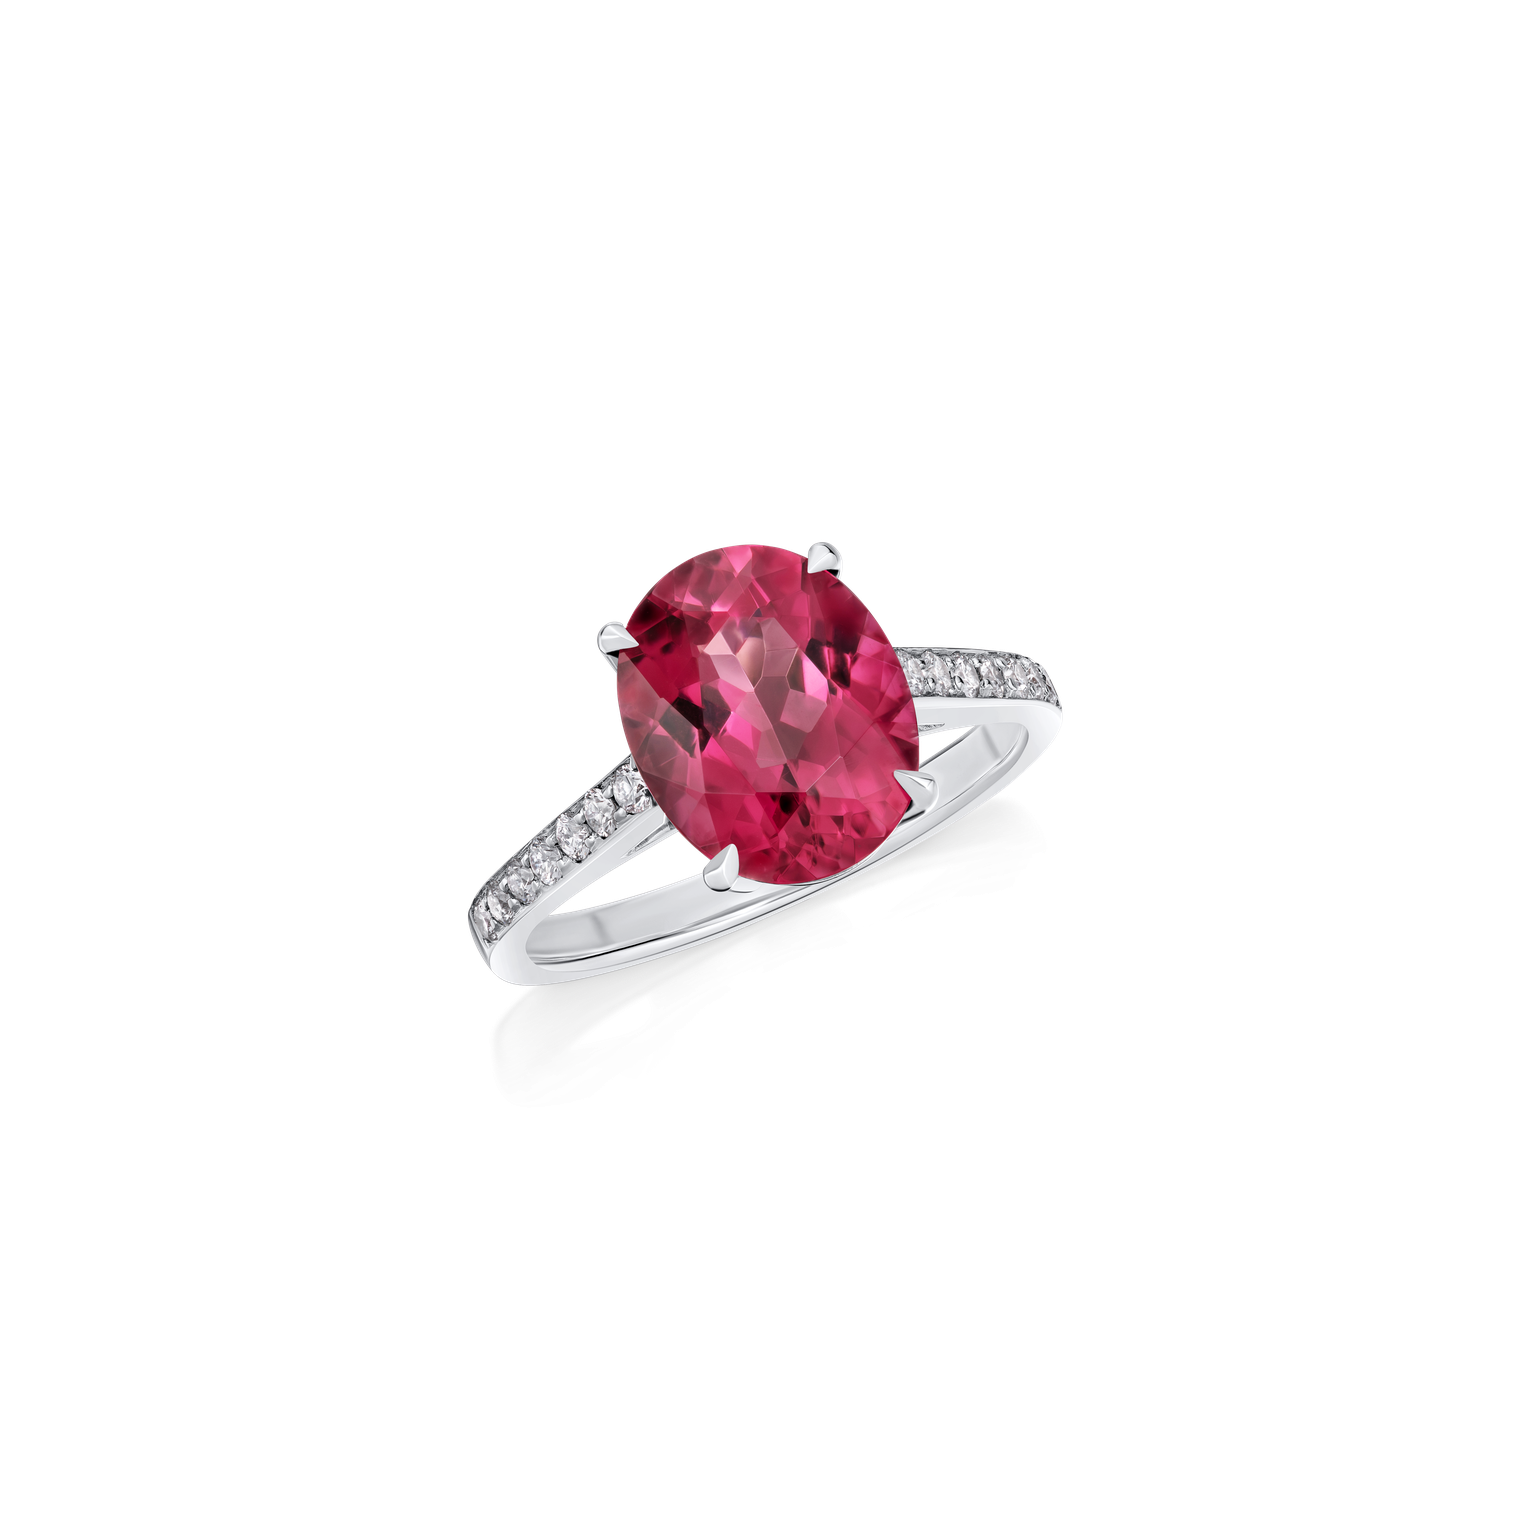 2.62cts Pink Tourmaline Ring With Diamond-Set Shoulders